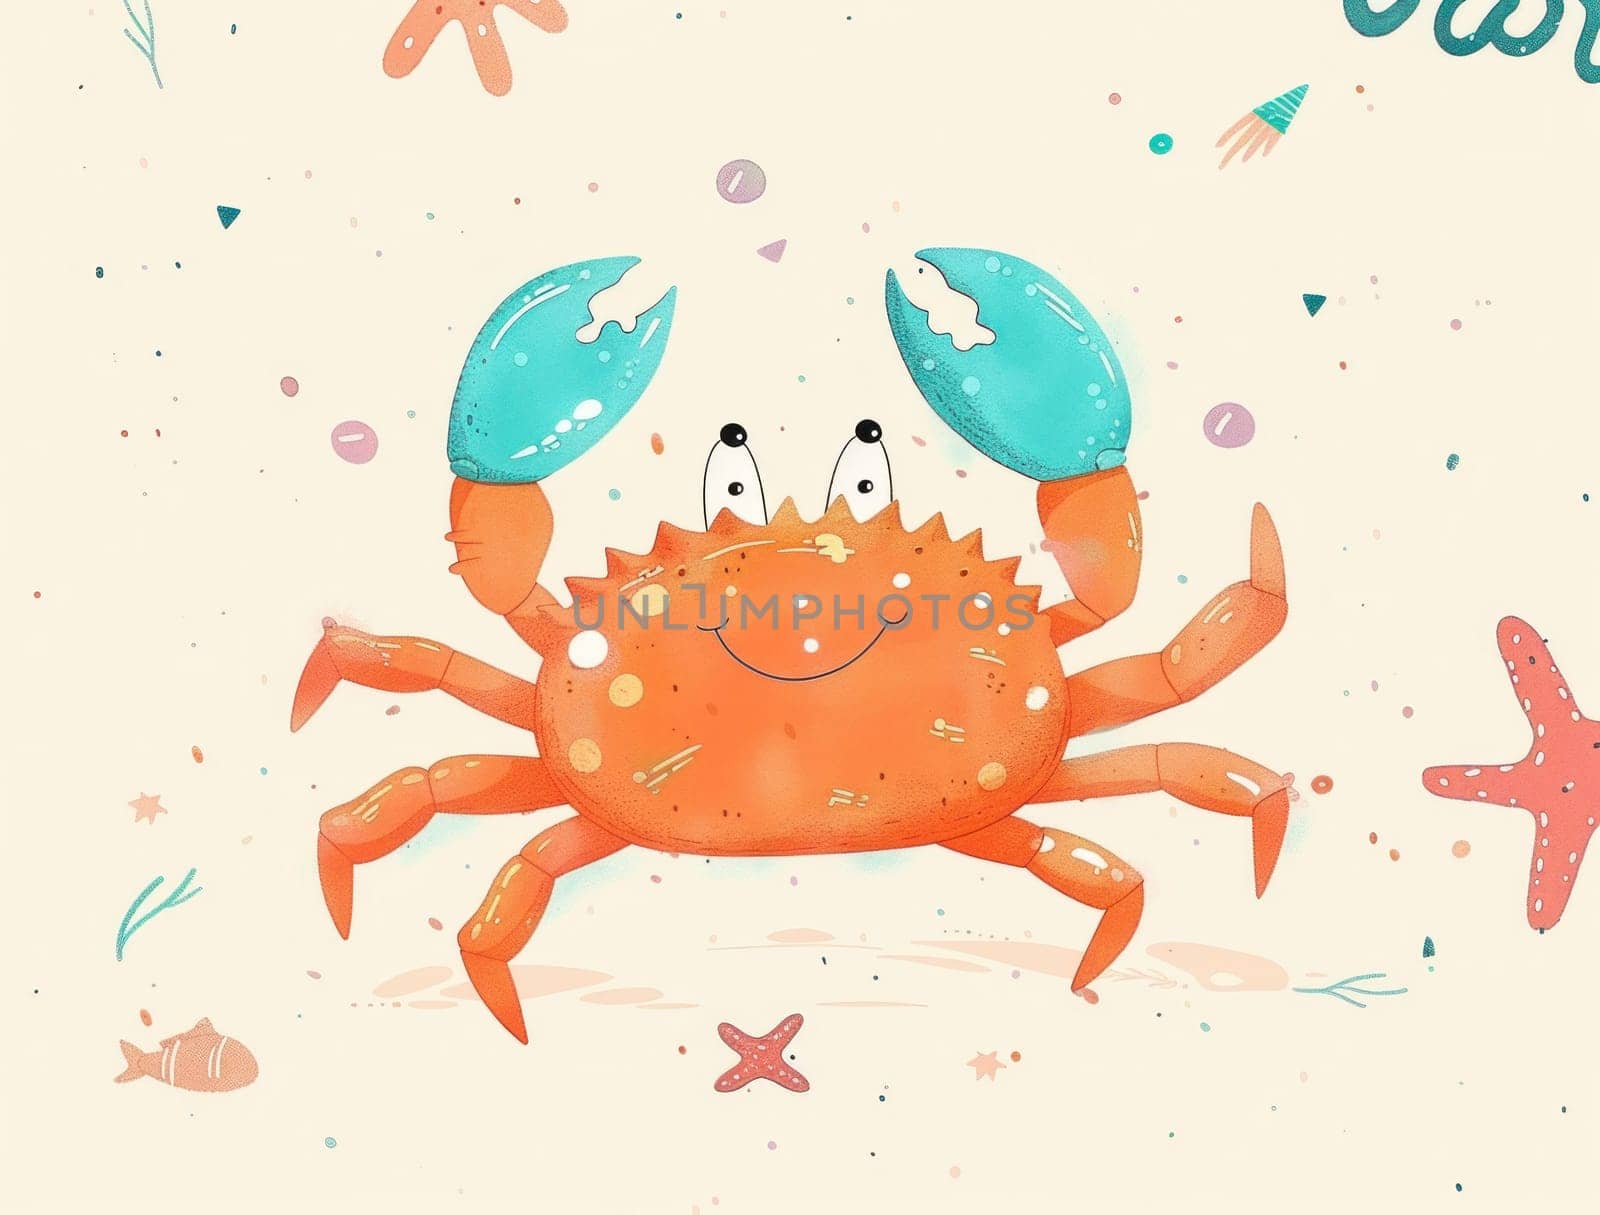 Beautiful seaside crab illustration with sea life text on sandy beach for travel and nature concepts